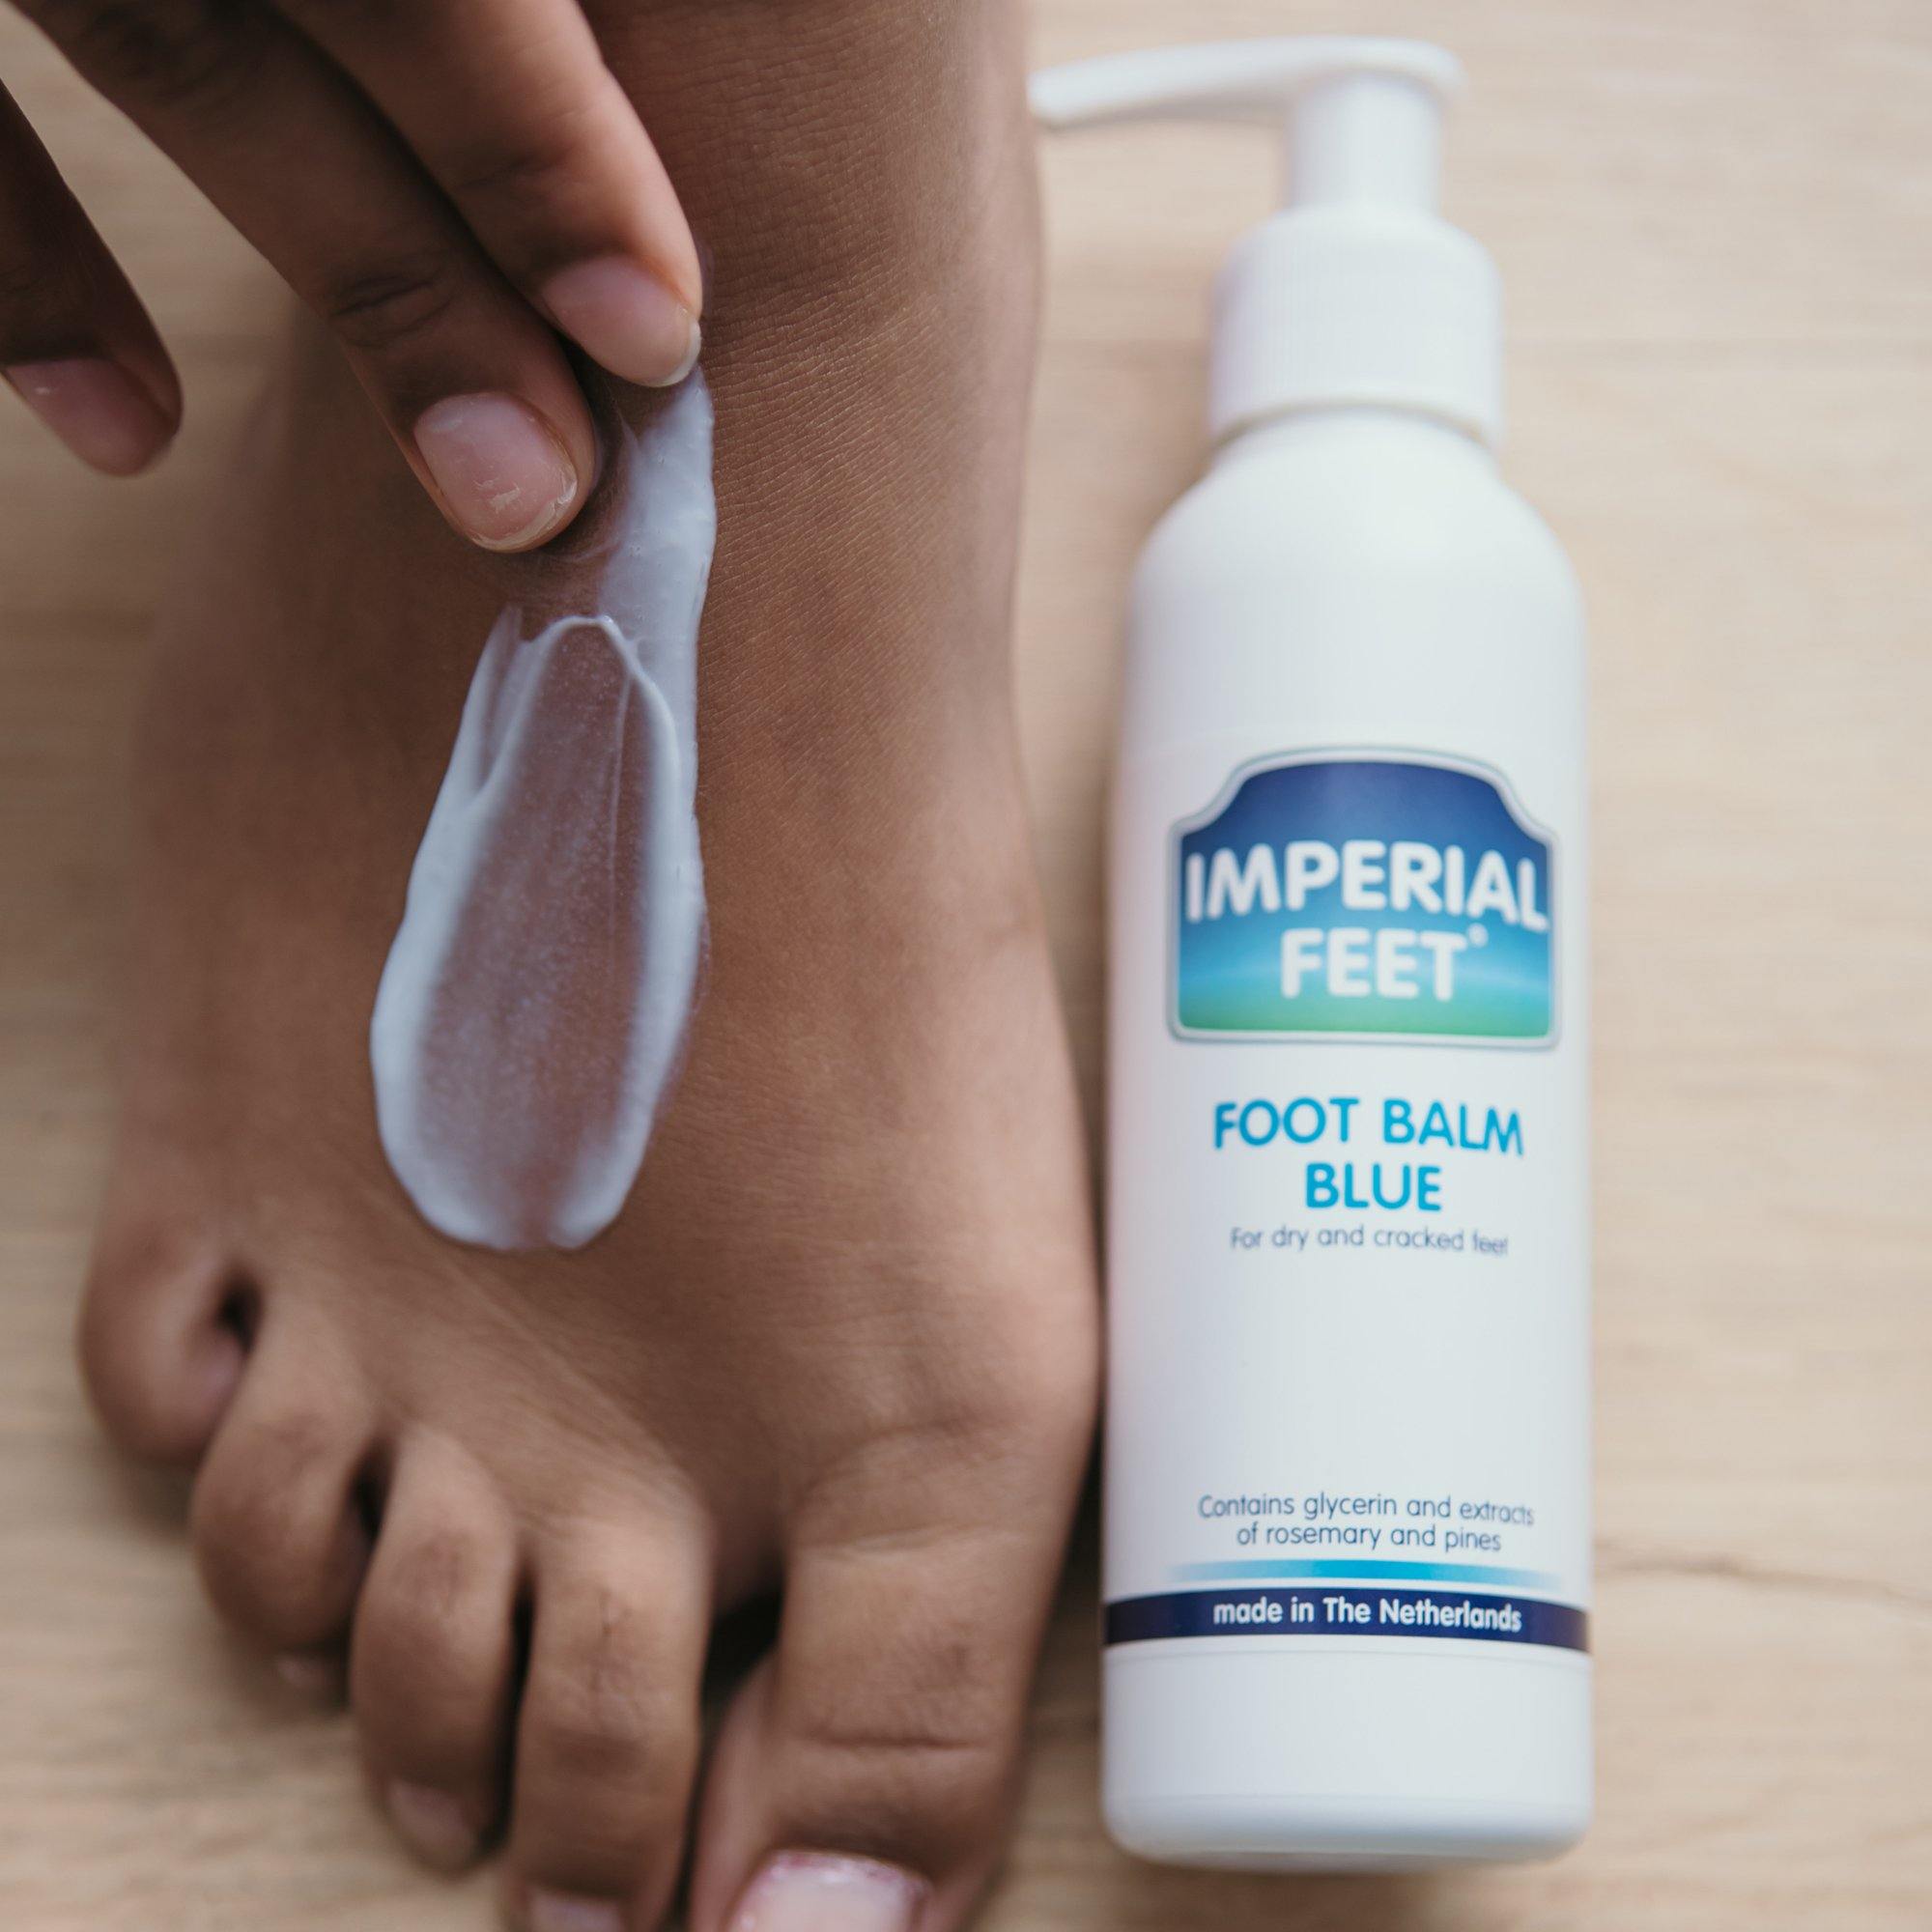 Foot Balm Blue - Imperial Feet - Foot care products - B2C, Corns and Calluses, Dry and Cracked Feet